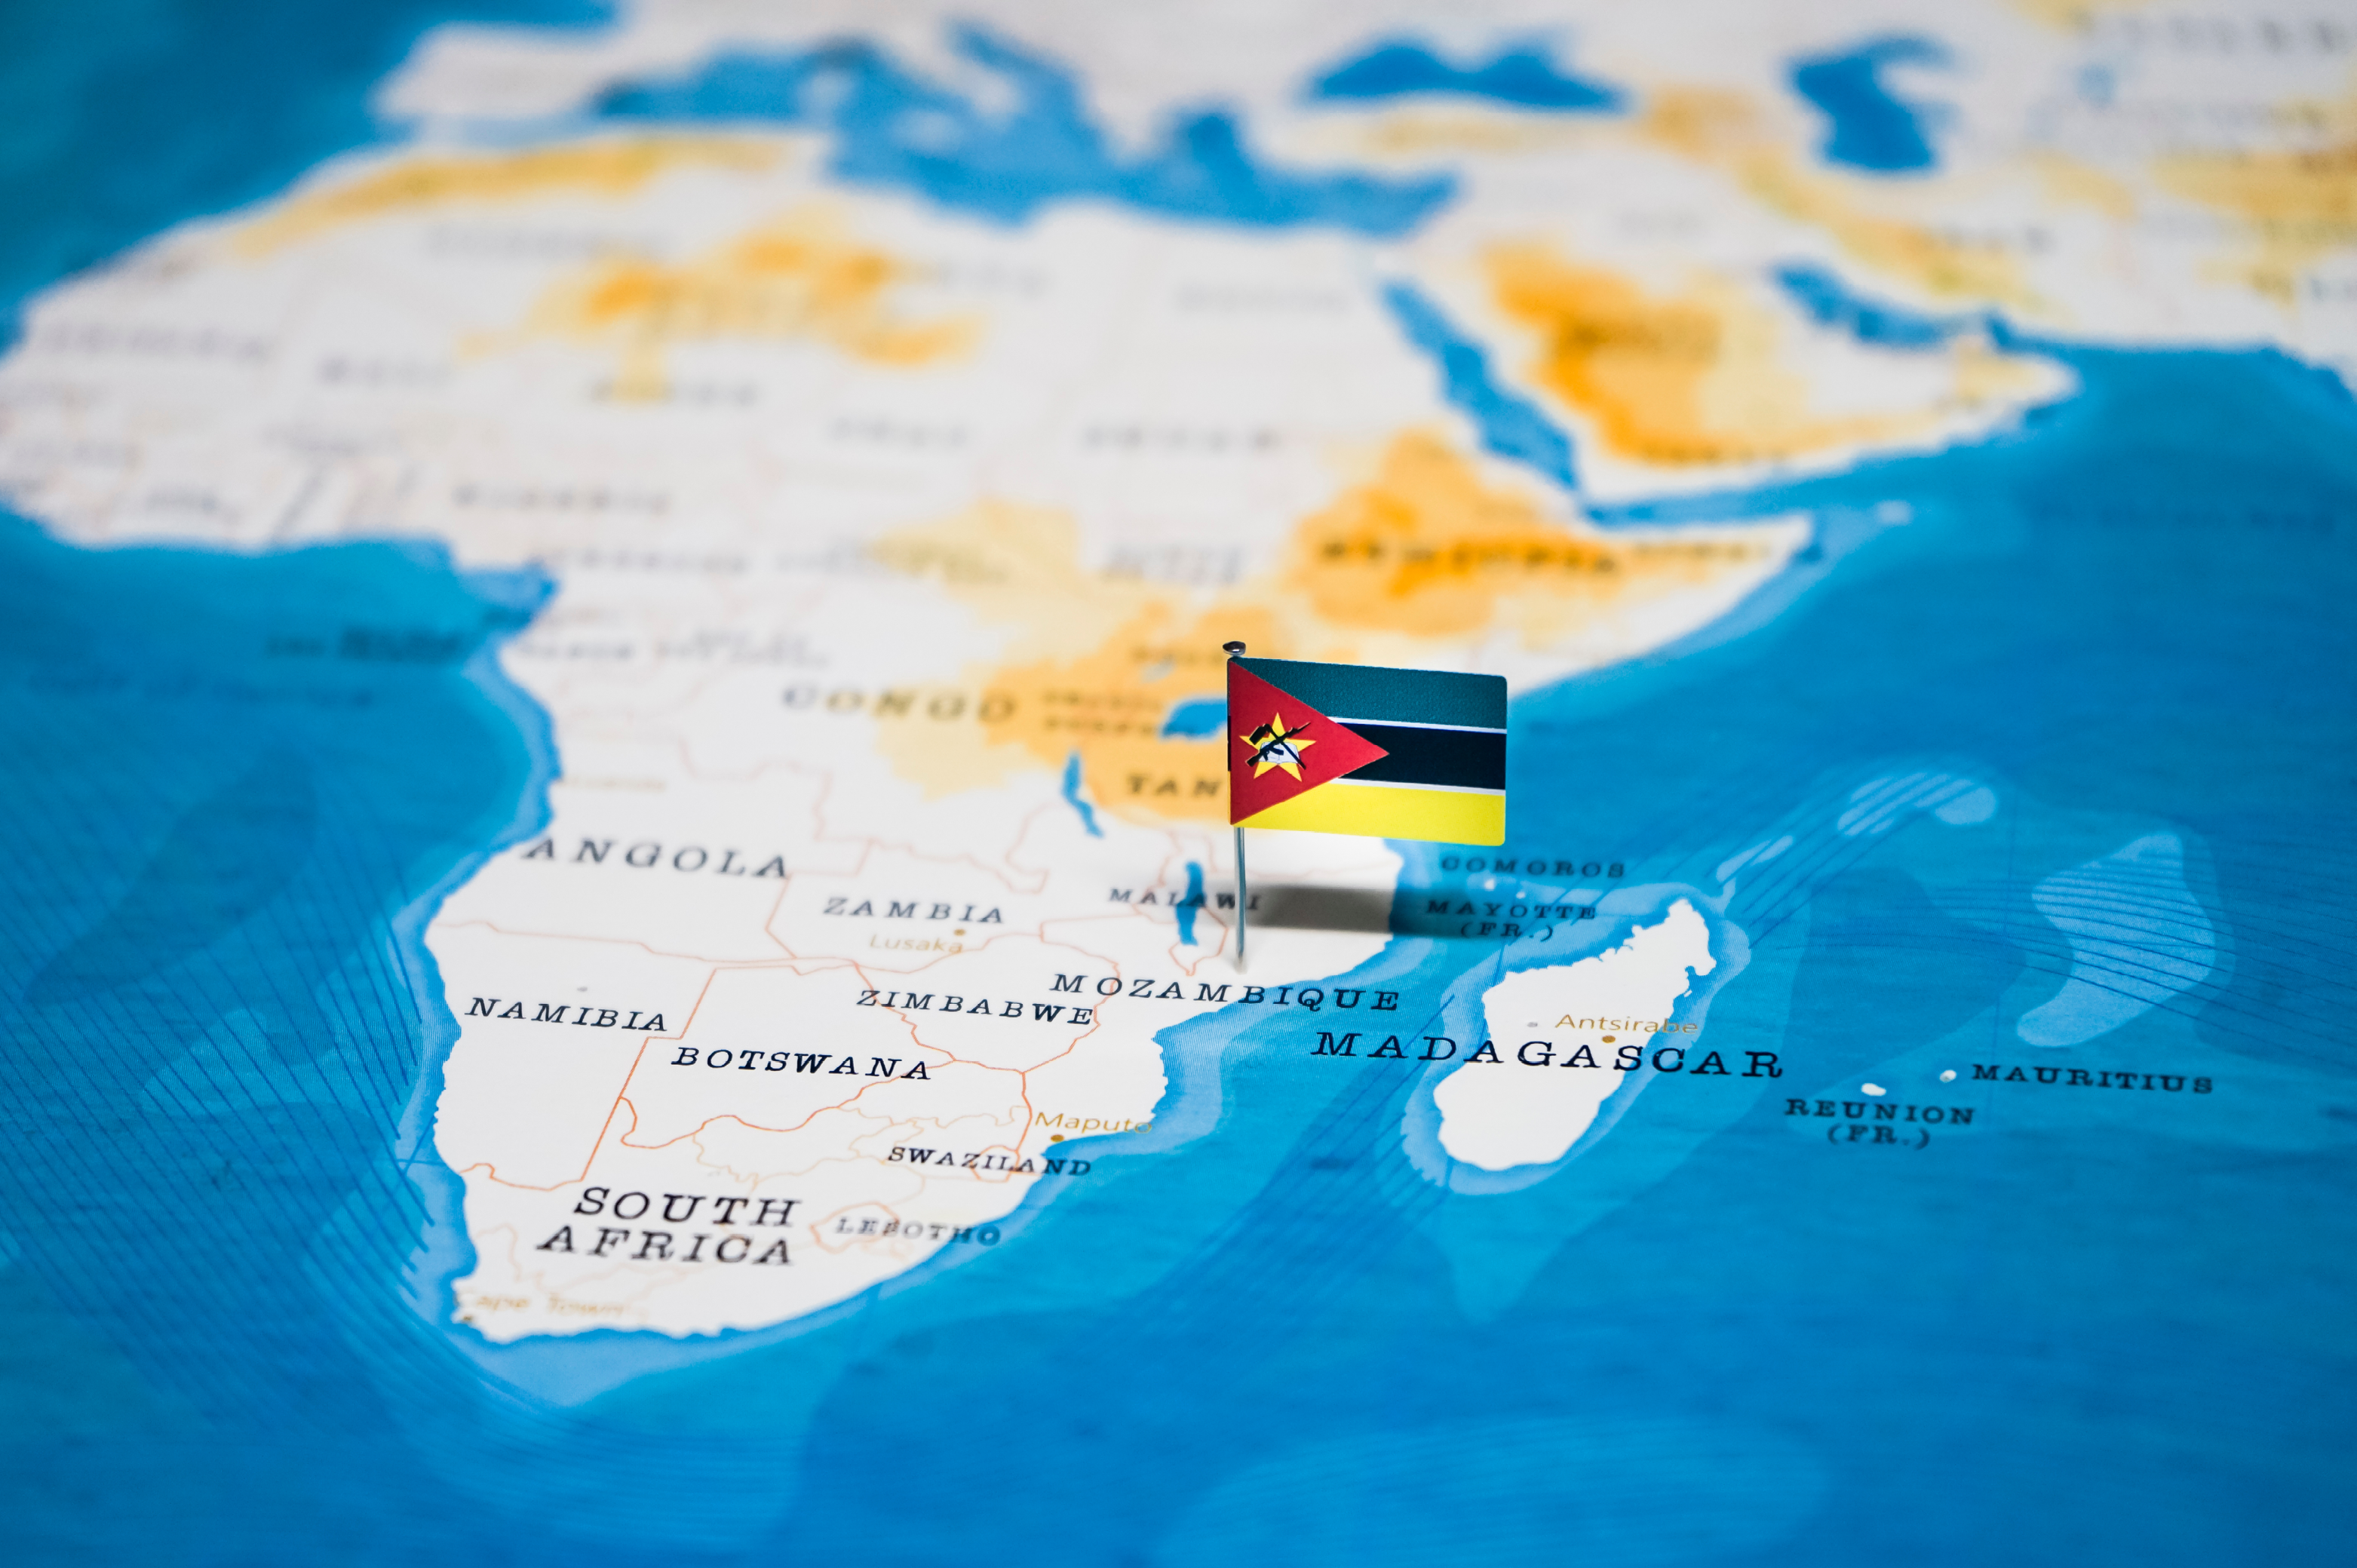 World Bank to Fund Mozambique’s Natural Gas Projects to Boost Energy Security in Africa